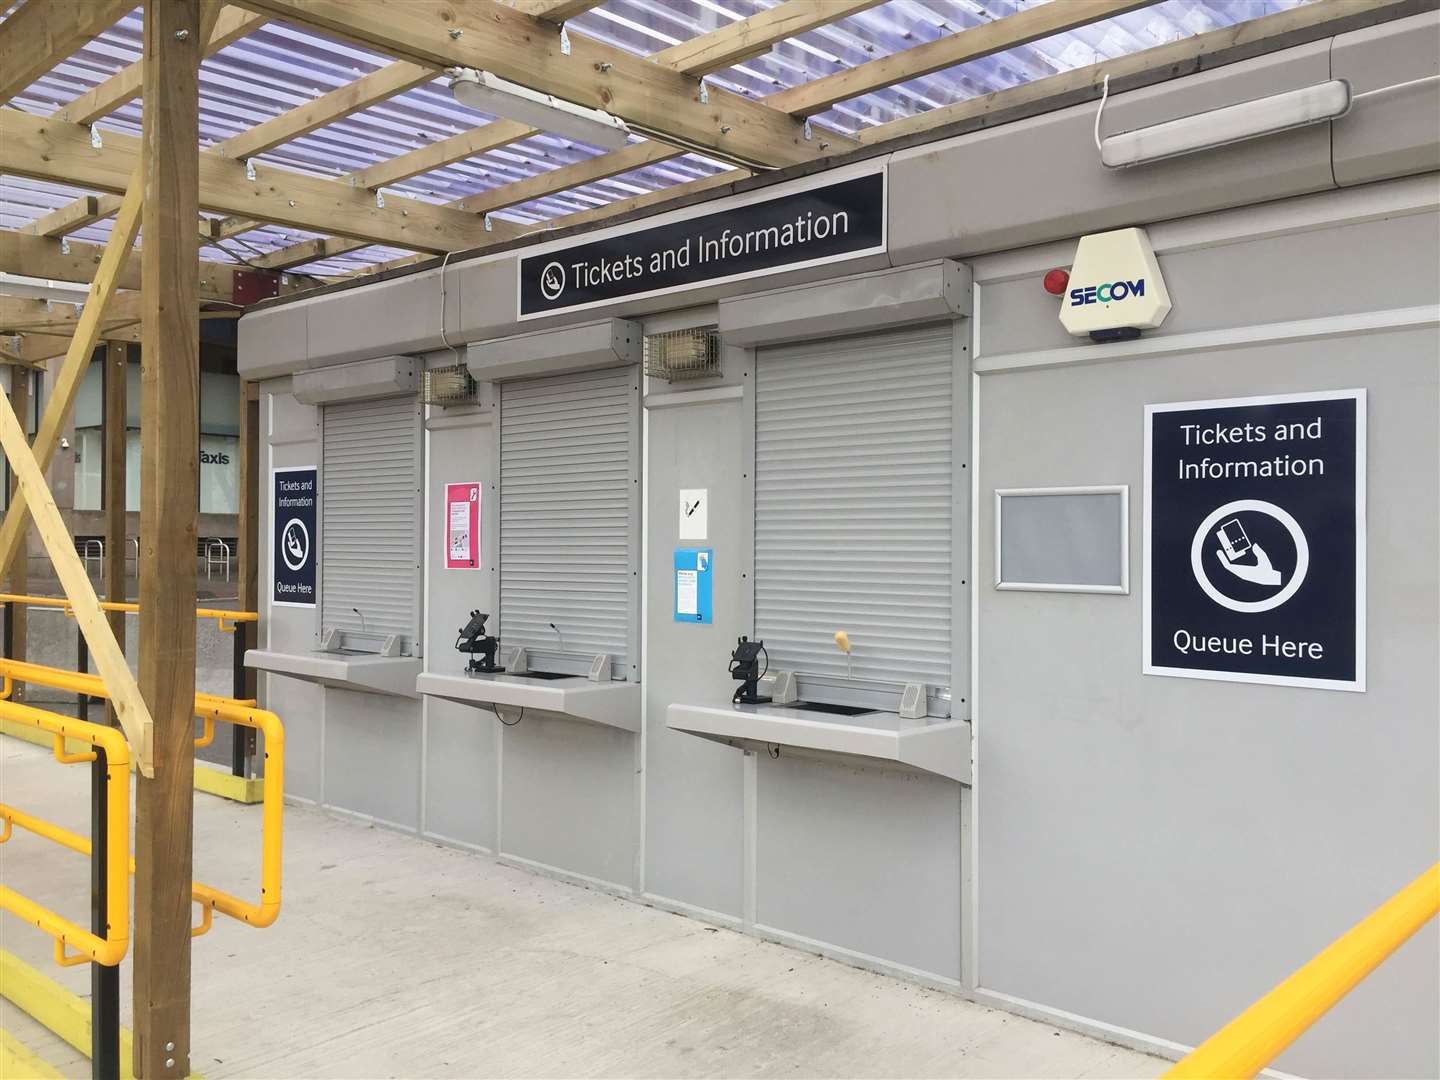 There are three booths at the temporary ticket office which stands separately to the main station